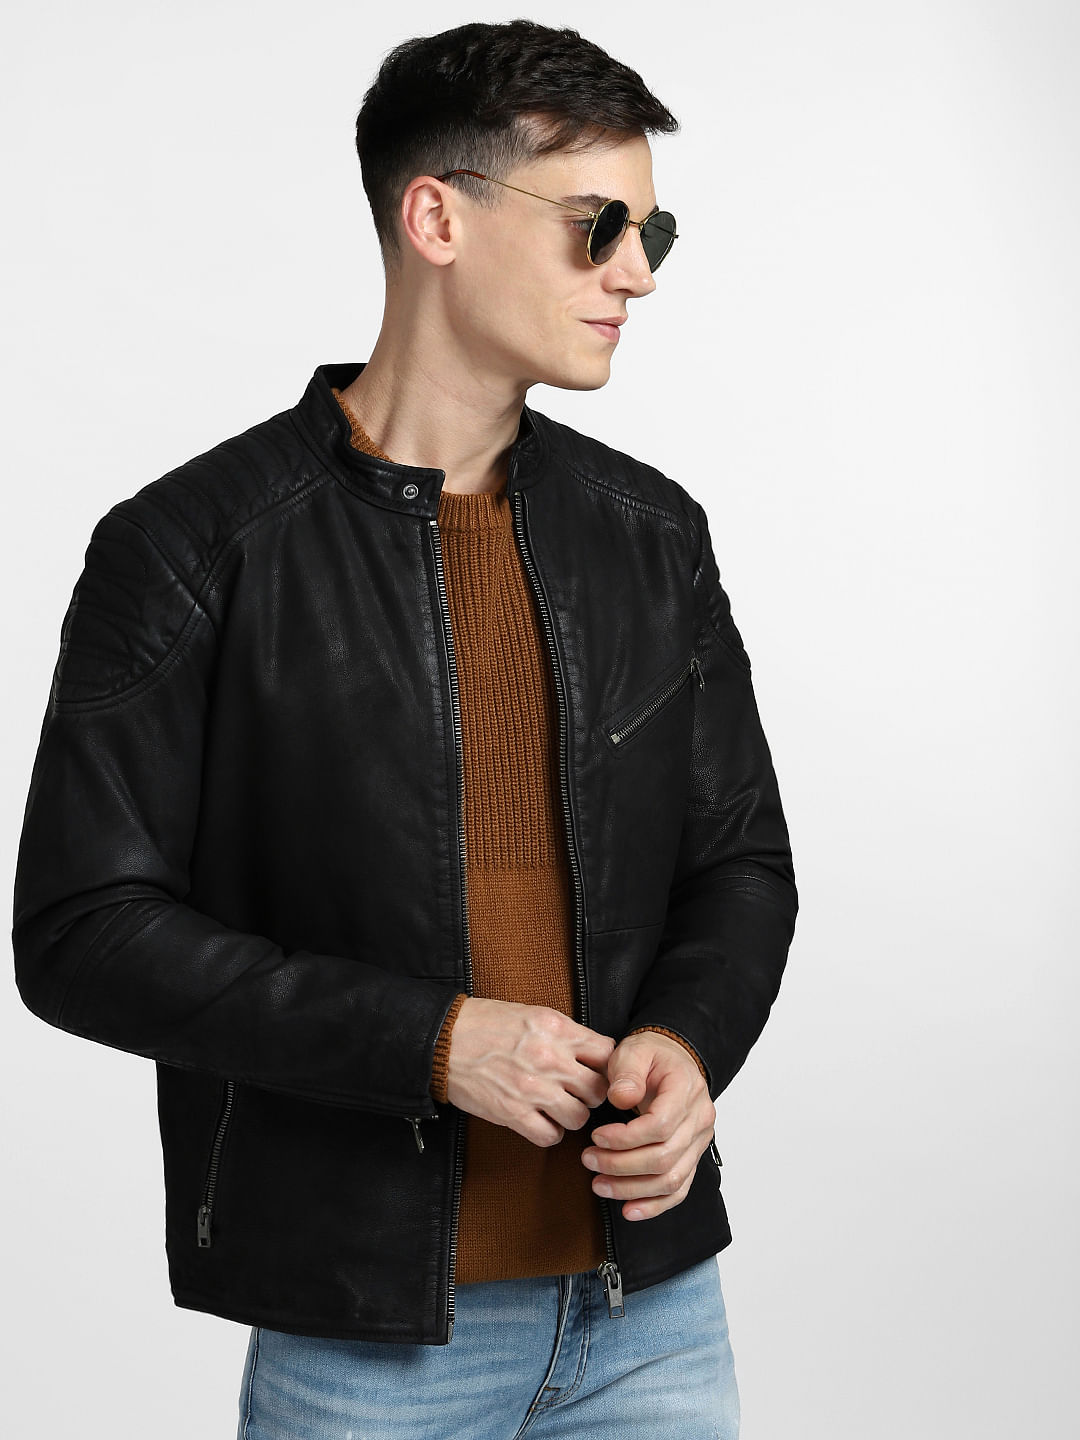 Buy Ak.Jackie.Boy Vegan Leather Jacket for Men | Made in India (L) at  Amazon.in